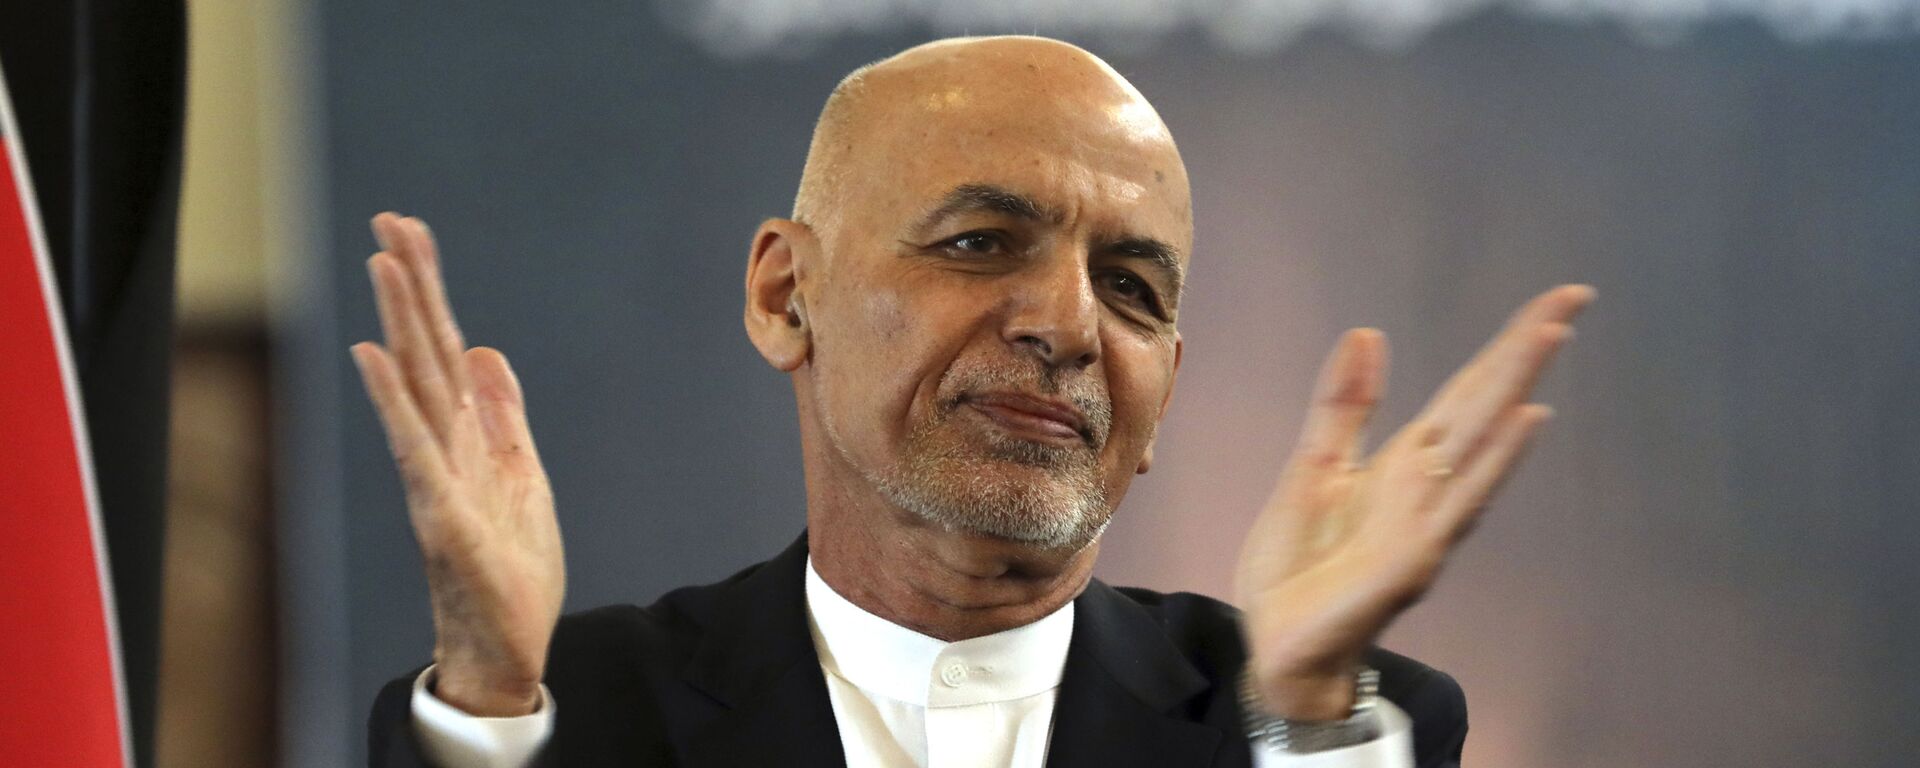 FILE - In this March 21, 2021 file photo, Afghan President Ashraf Ghani speaks during a ceremony celebrating the Persian New Year, Nowruz at the presidential palace in Kabul, Afghanistan. Afghanistan’s embattled president left the country Sunday, Aug. 15, 2021, joining his fellow citizens and foreigners in a stampede fleeing the advancing Taliban and signaling the end of a 20-year Western experiment aimed at remaking Afghanistan.  - Sputnik India, 1920, 28.06.2023